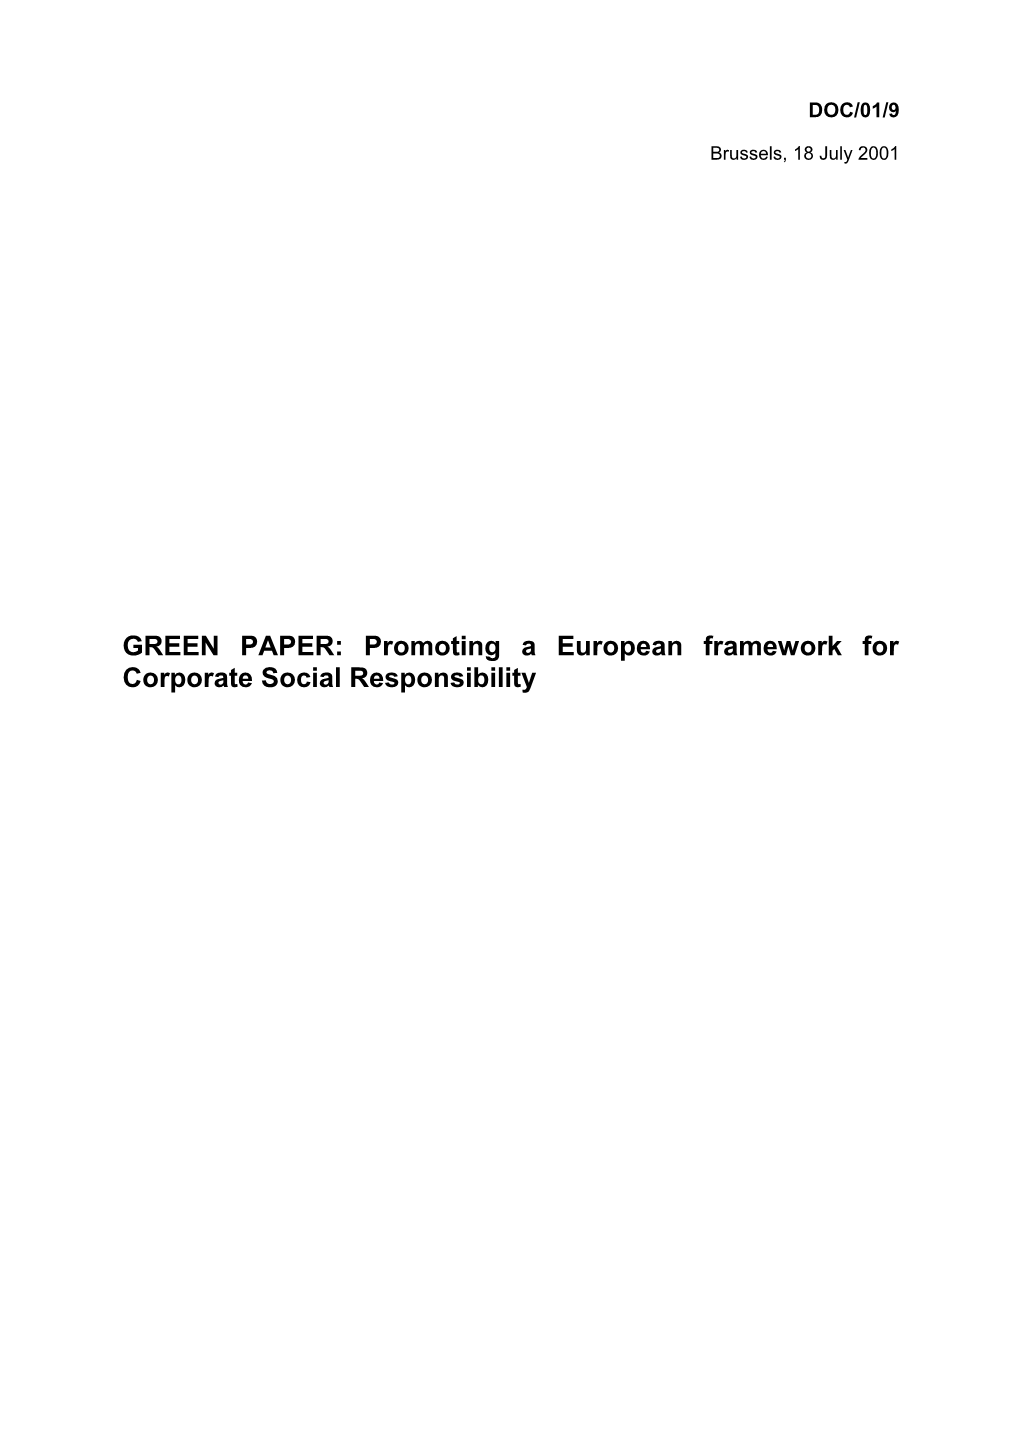 GREEN PAPER: Promoting a European Framework for Corporate Social Responsibility